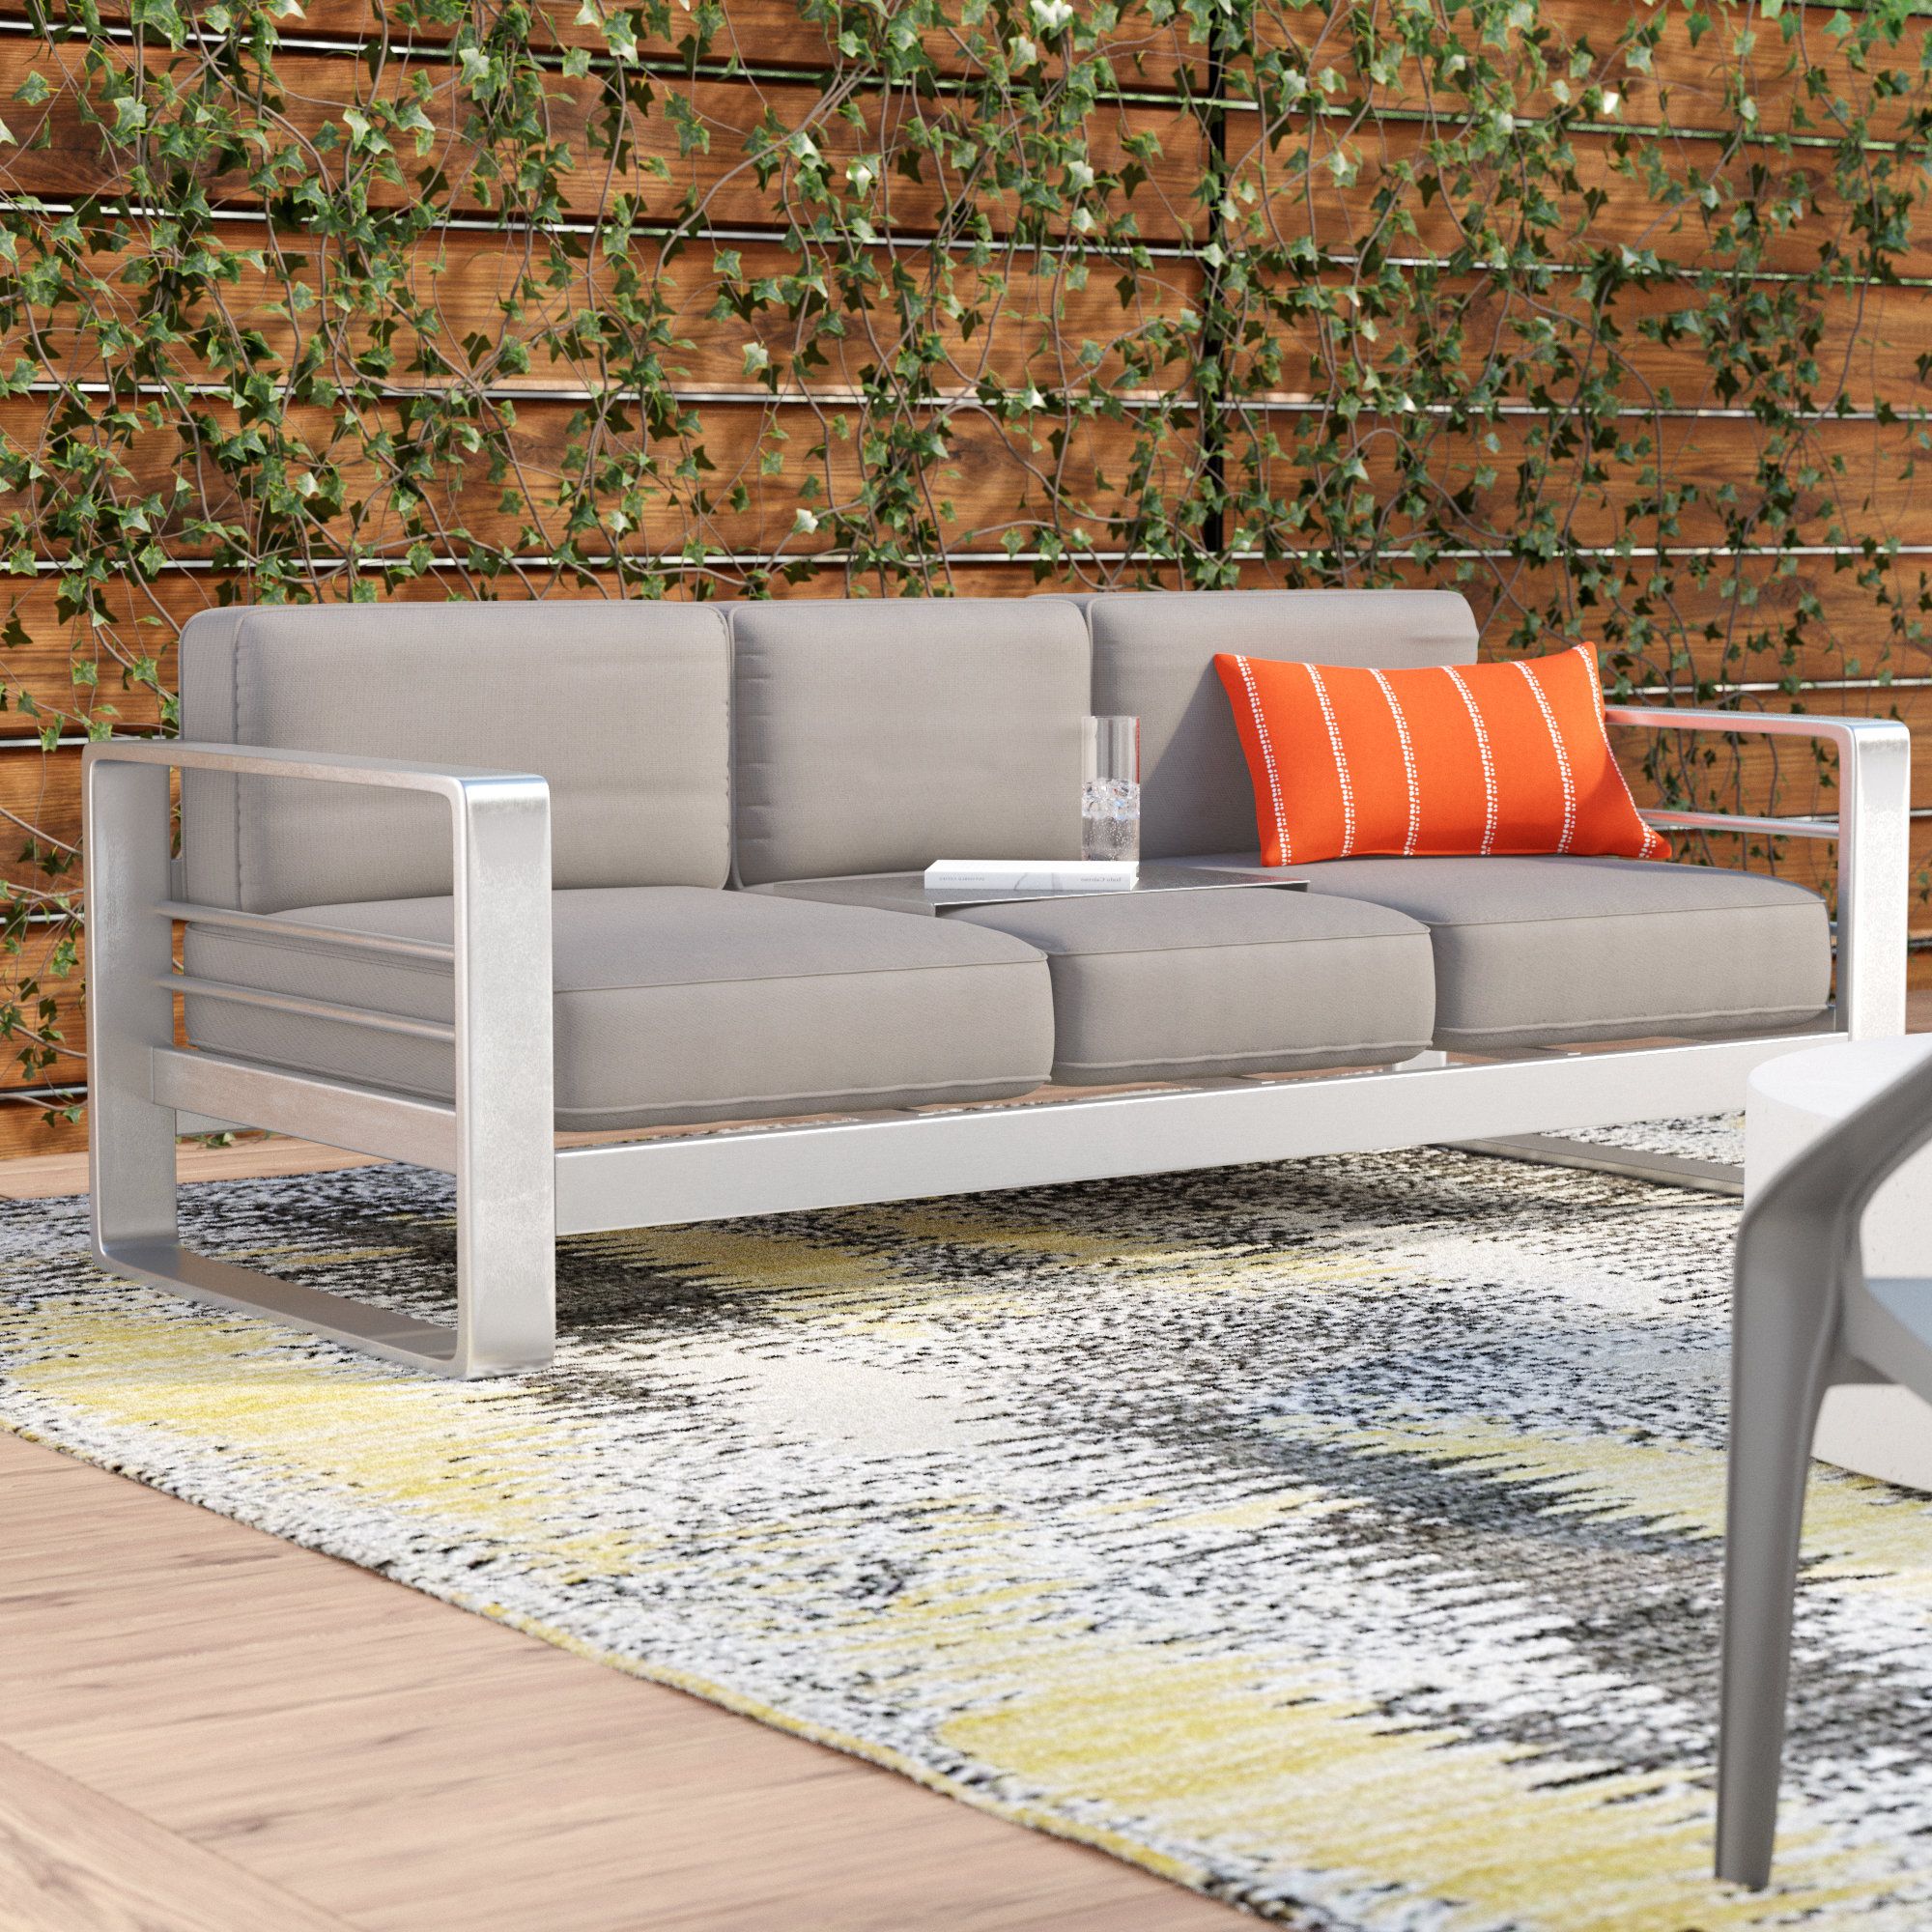 Most Recently Released Royalston Patio Sofas With Cushions Intended For Royalston Patio Sofa With Cushions (Photo 1 of 20)